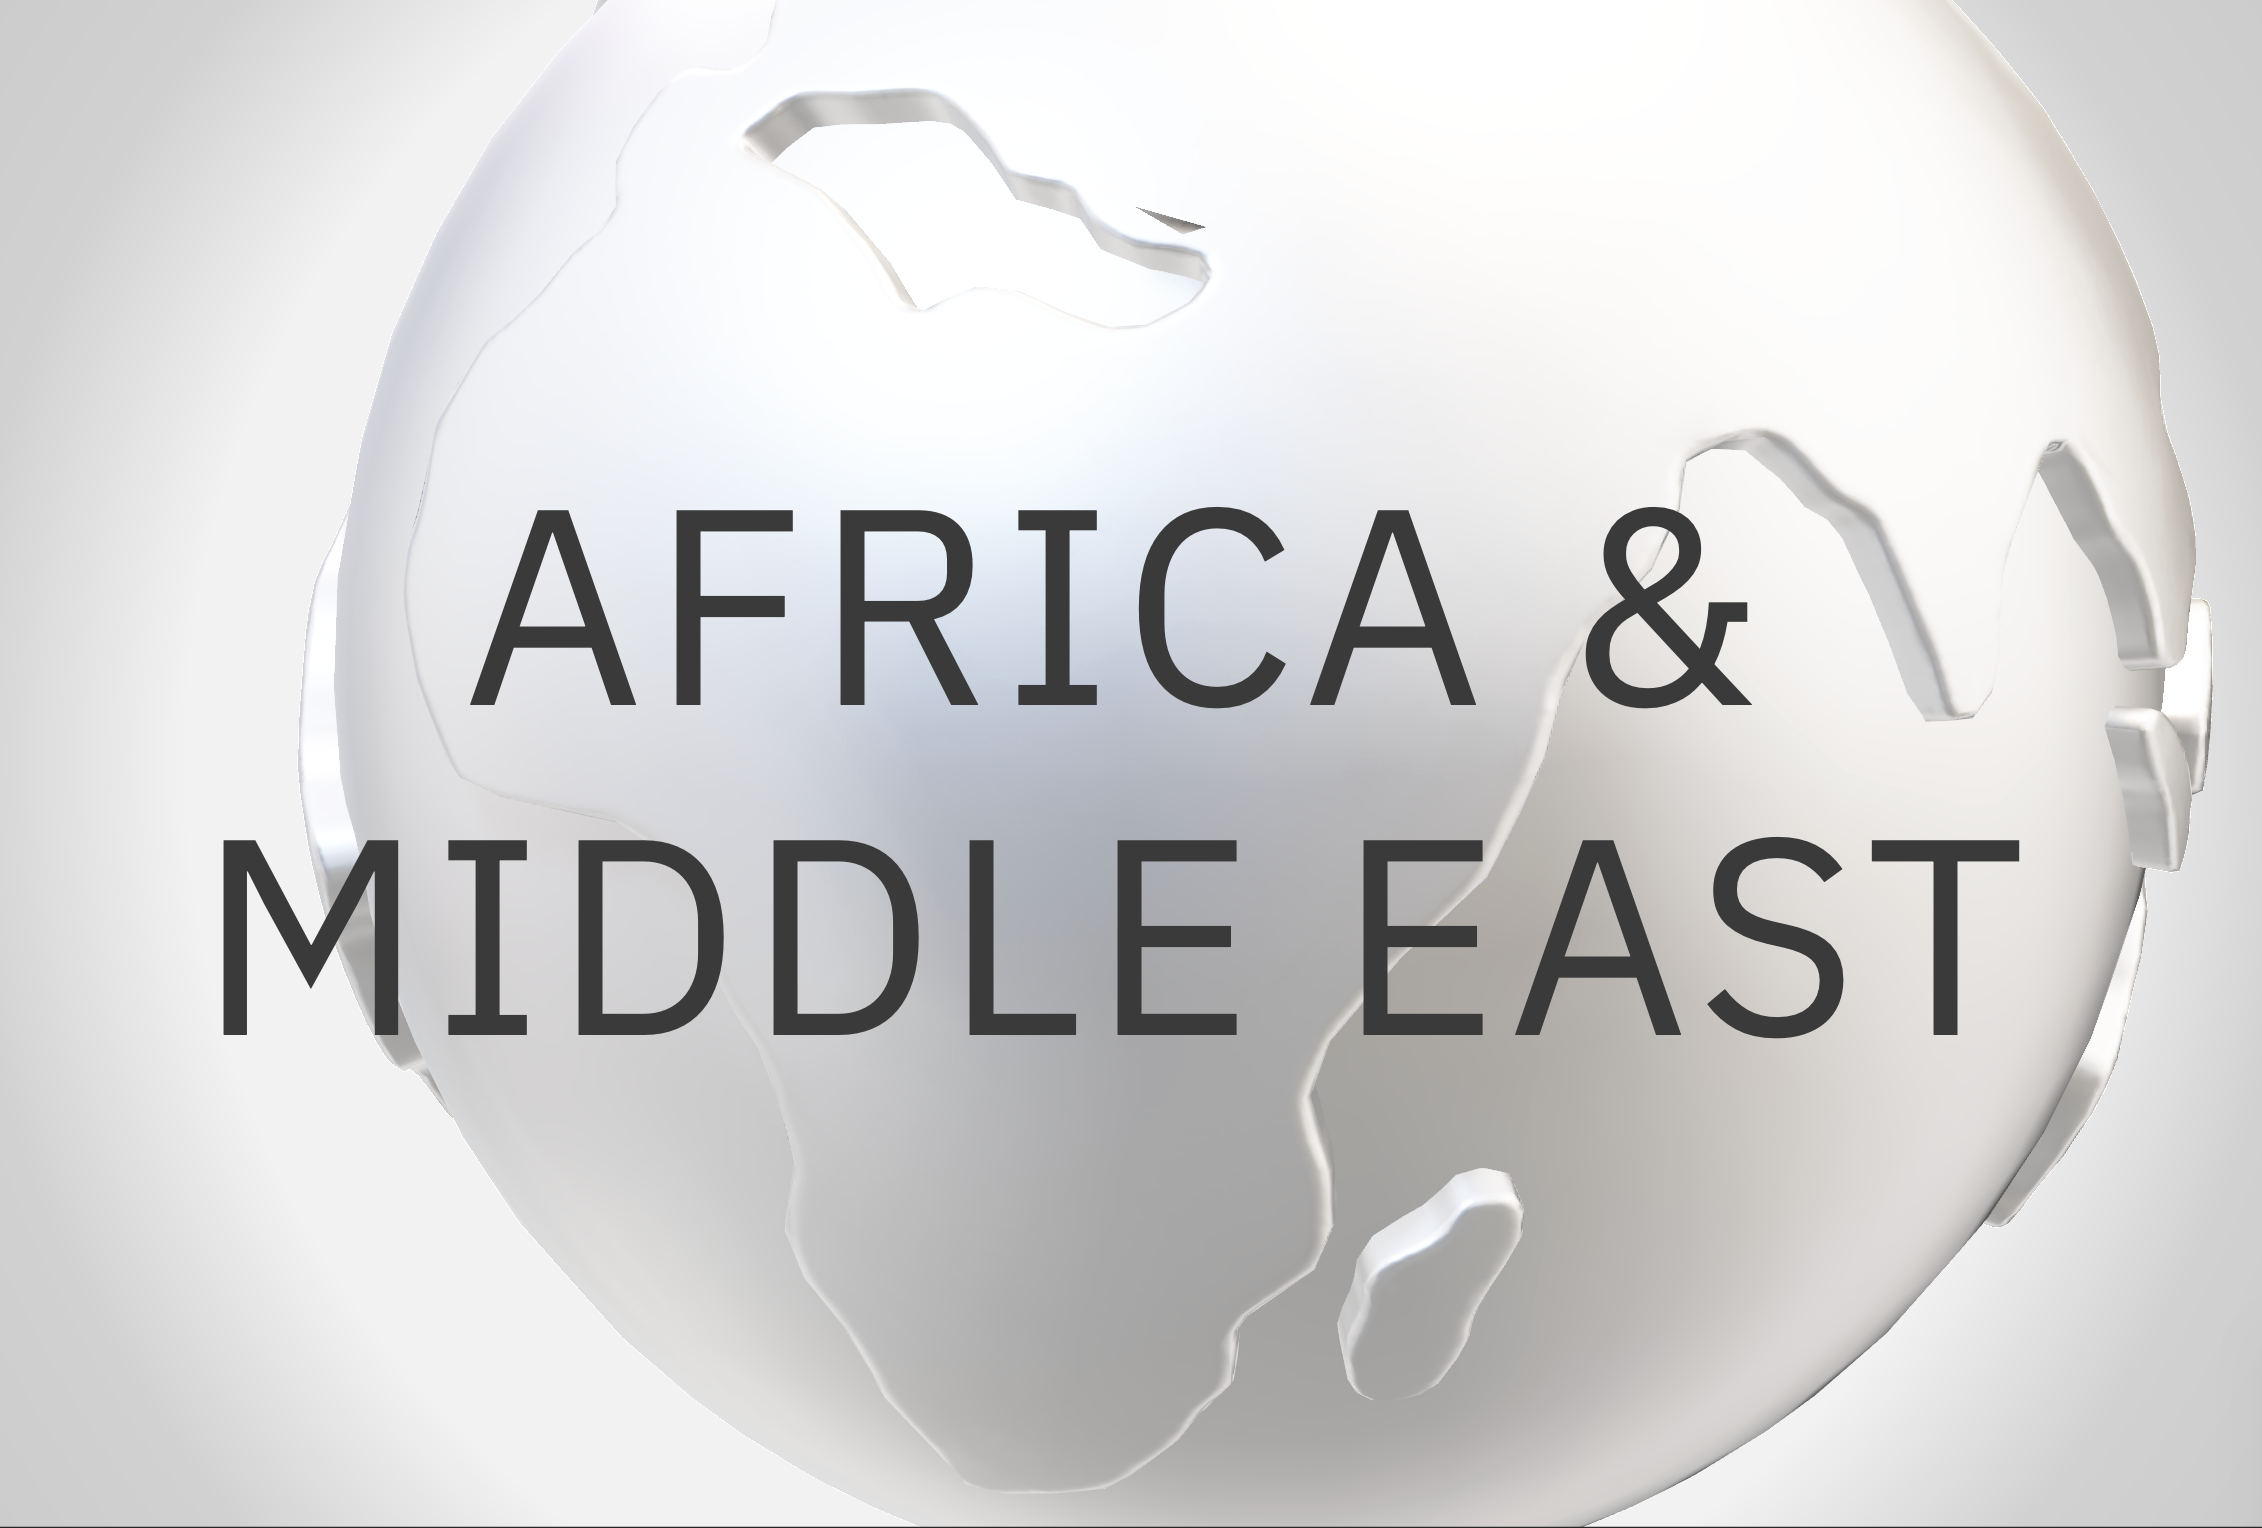 Africa and Middle East card